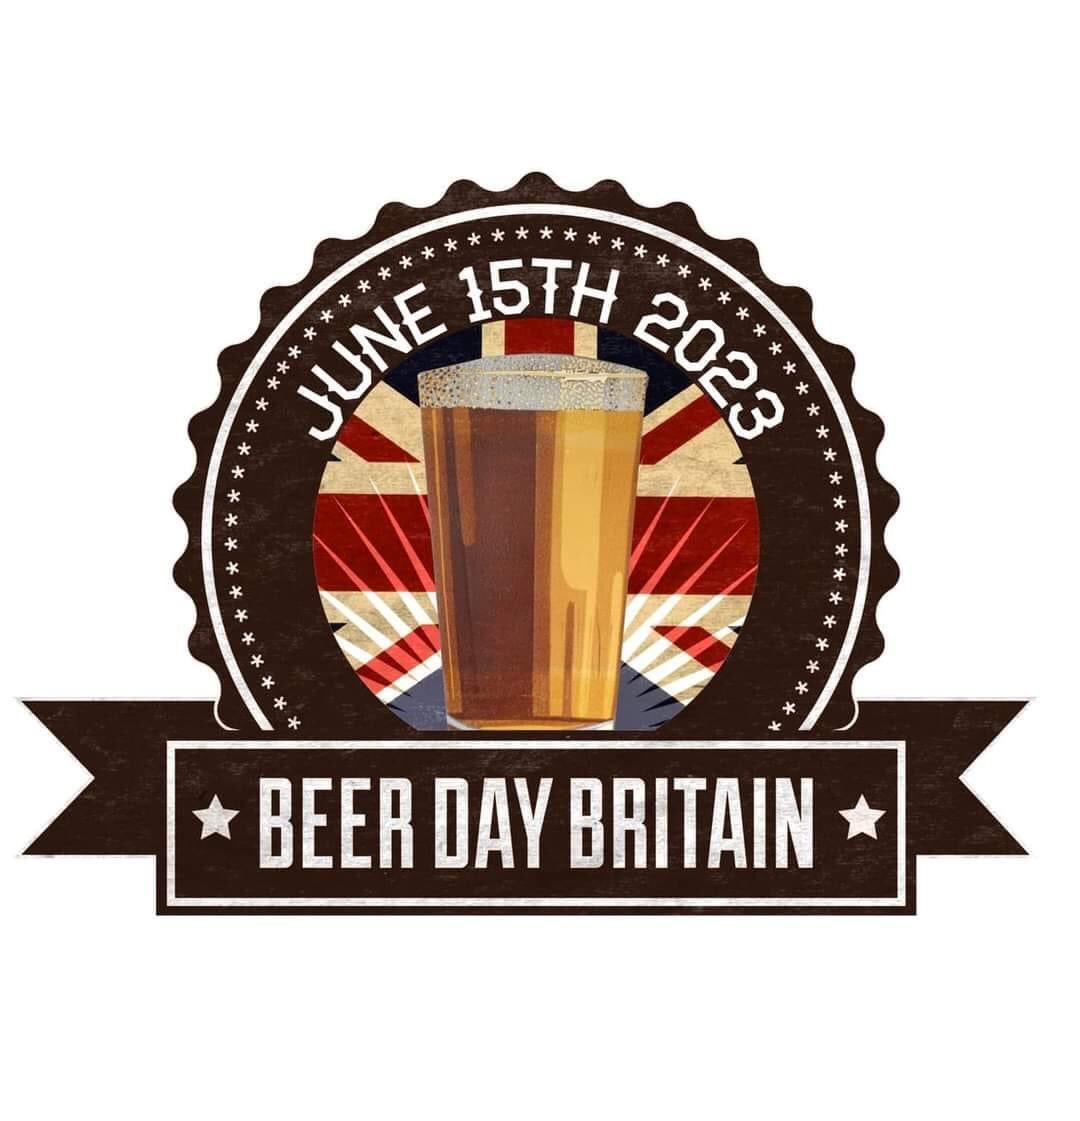 It’s #BeerDayBritain today! 

And as Friar Tuck said ”This is grain, which any fool can eat, but for which the Lord intended a more divine means of consumption.… beer!”

Do you need another reason to enjoy a beer today?!